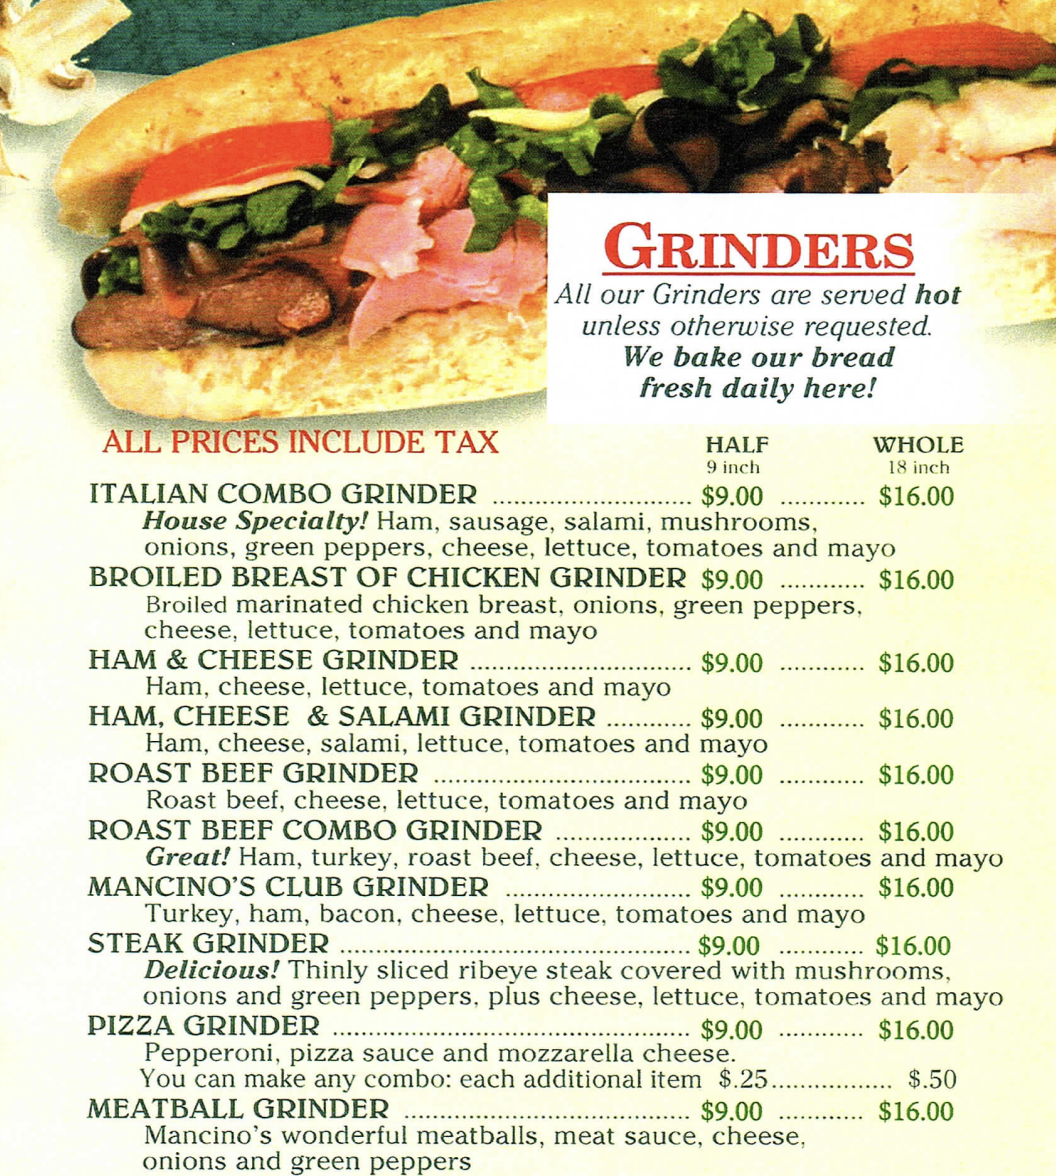 GRINDERS All our Grinders are served hot unless otherwise requested. We bake our bread fresh daily here! ALL PRICES INCLUDE TAX HALF WHOLE 9 inch 18 inch ITALIAN COMBO GRINDER $9.00 $16.00 House Specialty! Ham, sausage, salami, mushrooms, onions, green peppers, cheese, lettuce, tomatoes and mayo BROILED BREAST OF CHICKEN GRINDER $9.00 $16.00 Broiled marinated chicken breast, onions, green peppers, cheese, lettuce, tomatoes and mayo HAM & CHEESE GRINDER $9.00 $16.00 Ham, cheese, lettuce, tomatoes and mayo HAM, CHEESE & SALAMI GRINDER $9.00 $16.00 Ham, cheese, salami, lettuce, tomatoes and mayo ROAST BEEF GRINDER $9.00 $16.00 Roast beef, cheese, lettuce, tomatoes and mayo ROAST BEEP COMBO GRINDER $9.00 $16.00 Great! Ham, turkey, roast beef, cheese, lettuce, tomatoes and mayo MANCINO'S CLUB GRINDER $9.00 $16.00 Turkey, ham, bacon, cheese, lettuce, tomatoes and mayo STEAK GRINDER $9.00 $16.00 Delicious! Thinly sliced ribeye steak covered with mushrooms. onions and green peppers, plus cheese, lettuce, tomatoes and mayo PIZZA GRINDER $9.00 ............ $16.00 Pepperoni, pizza sauce and mozzarella cheese. You can make any combo: each additional item $.25................ $.50 MEATBALL GRINDER $9.00 $16.00 Mancino's wonderful meatballs, meat sauce, cheese, onions and green peppers